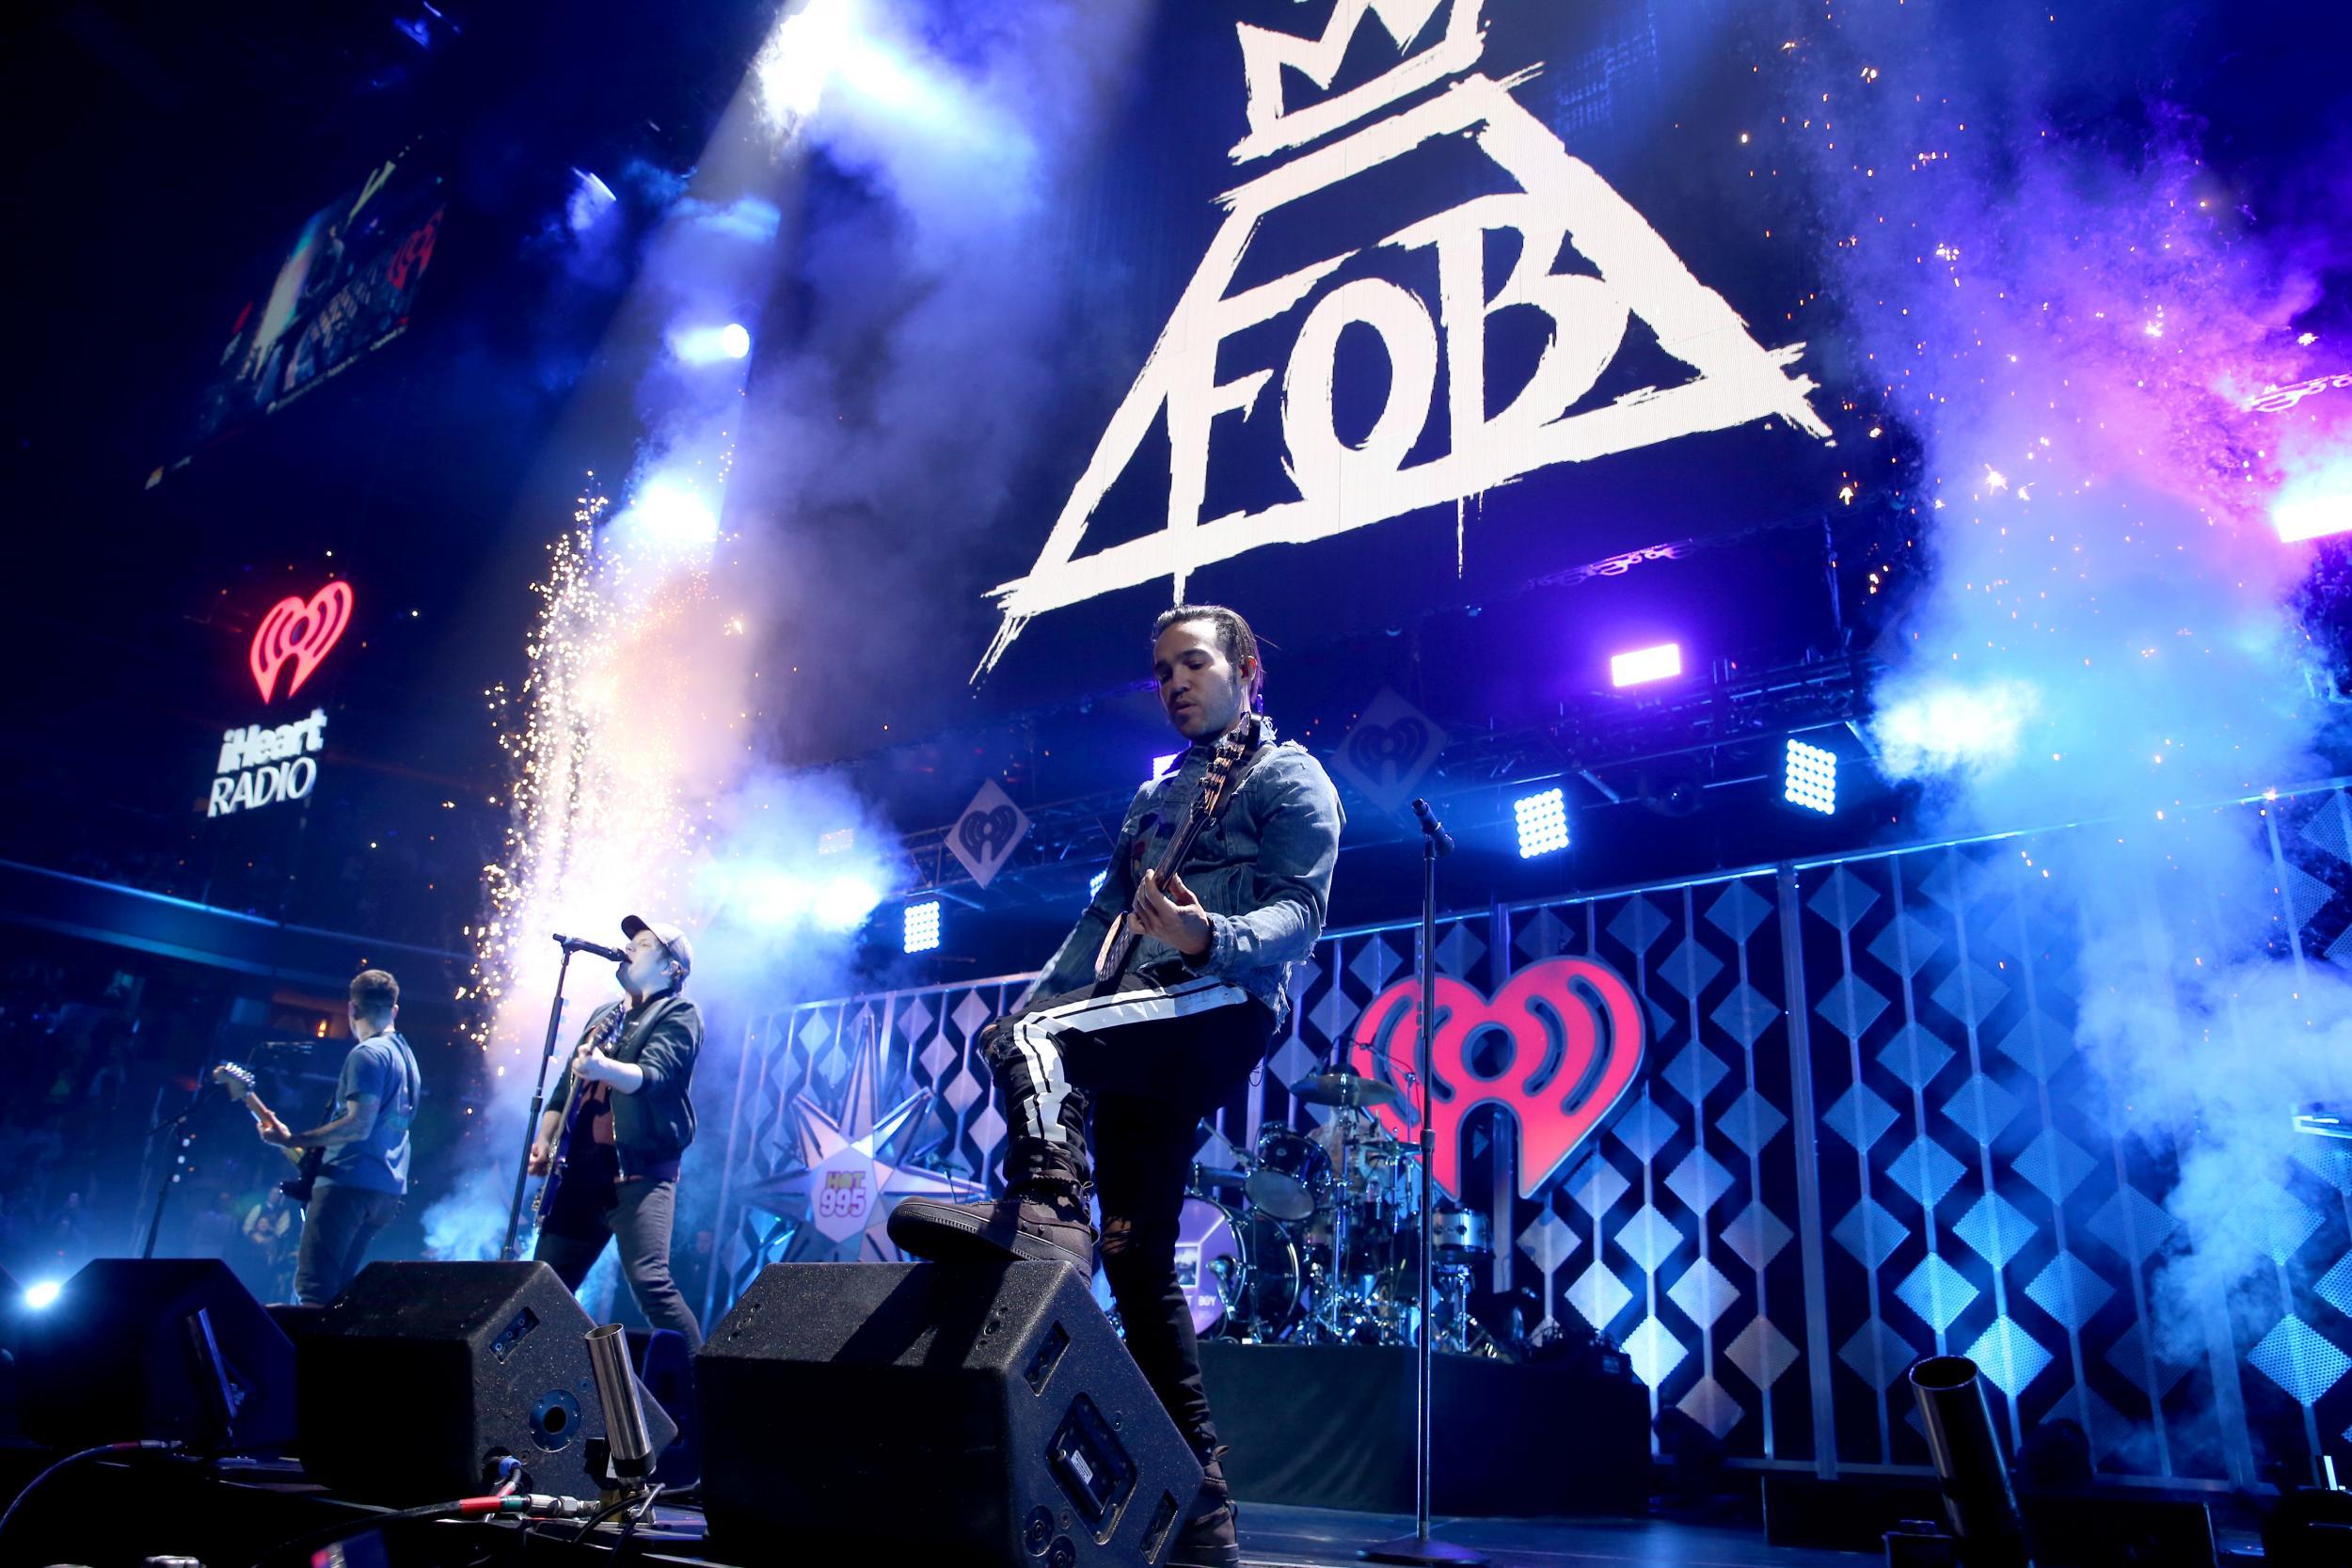 &#13;
Fall Out Boy performs at Jingle Ball 2017. Credit: Tasos Katopodis/Getty Images for iHeartMedia&#13;